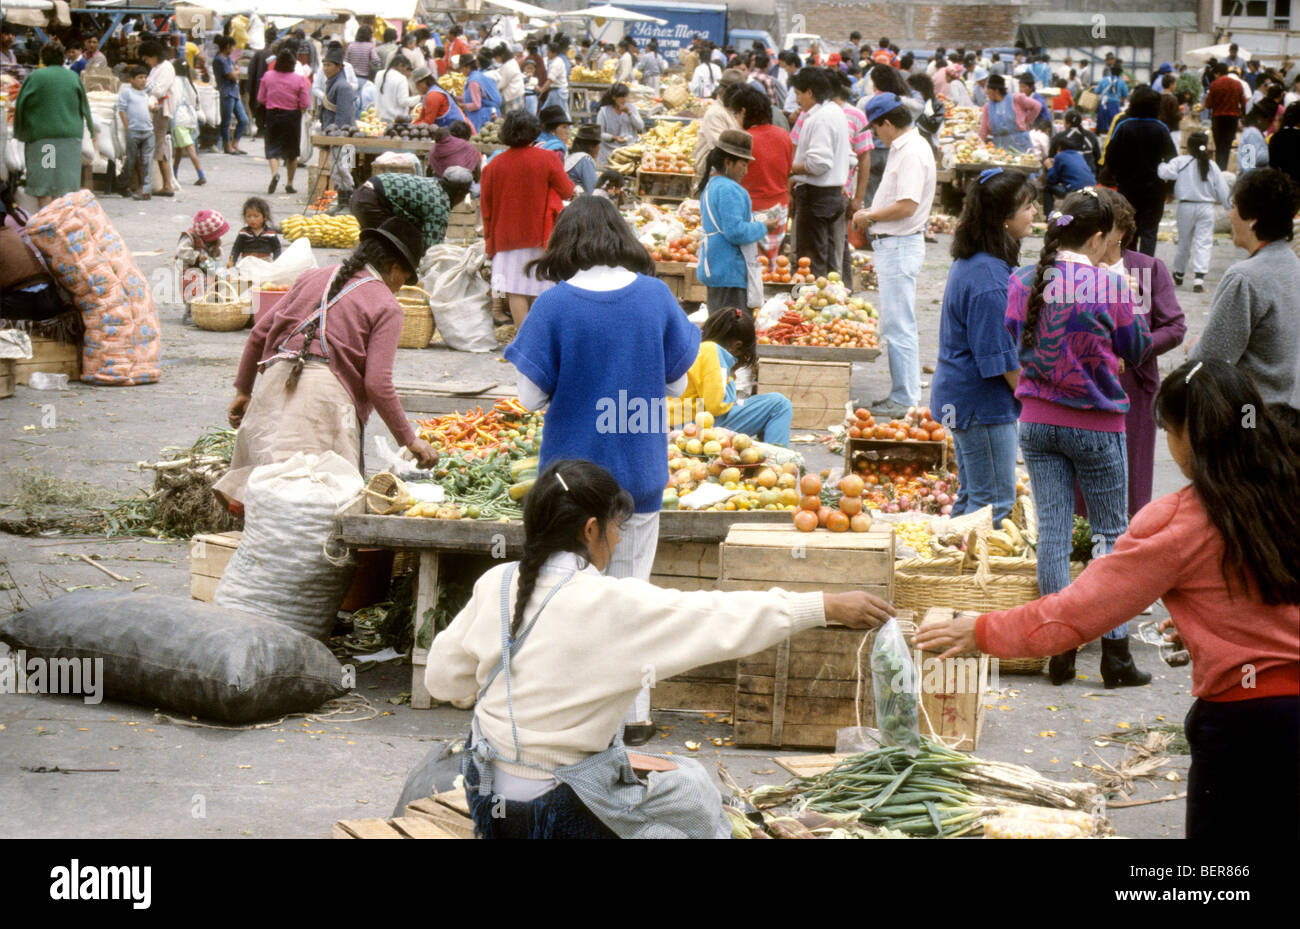 Line of vegetable sellers in local market  upland Ecuador Stock Photo